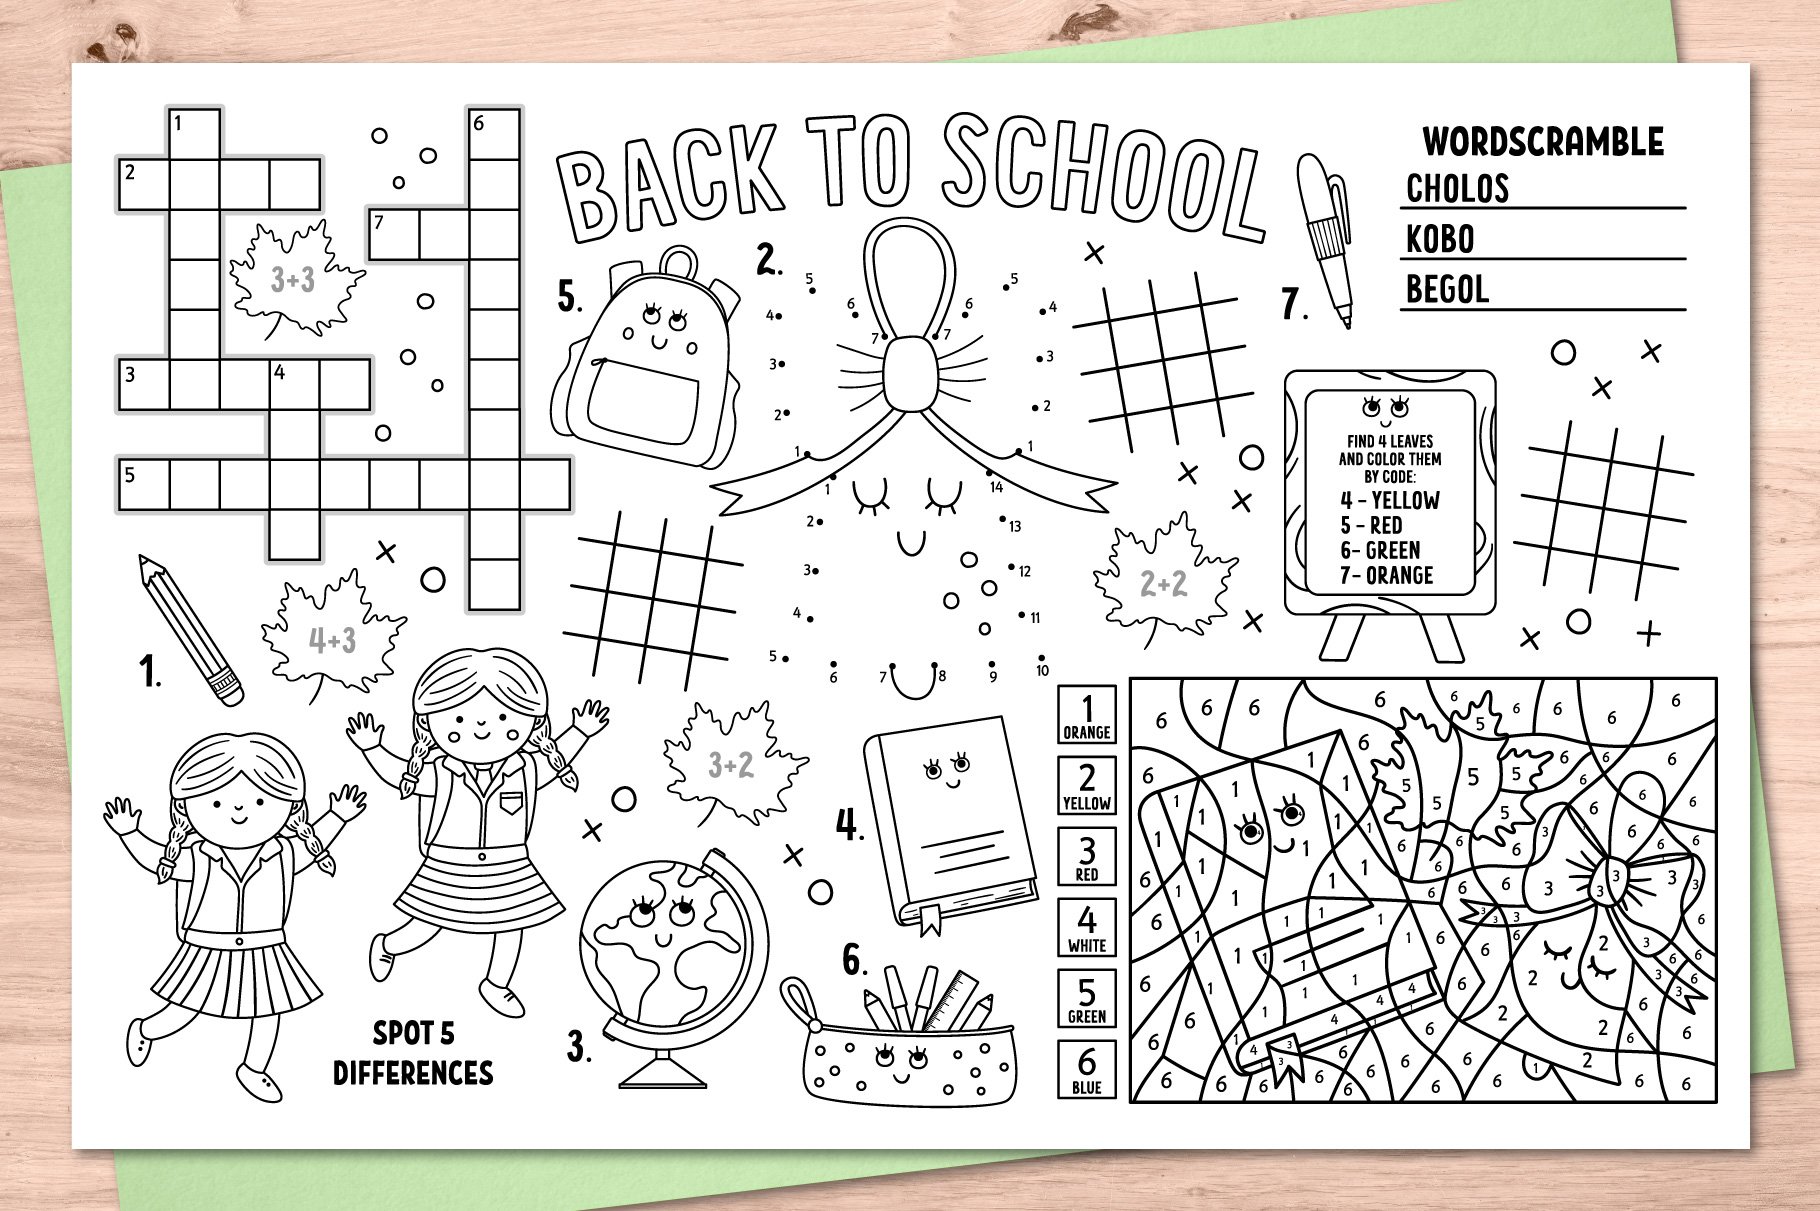 Back to school activity placemats preview image.